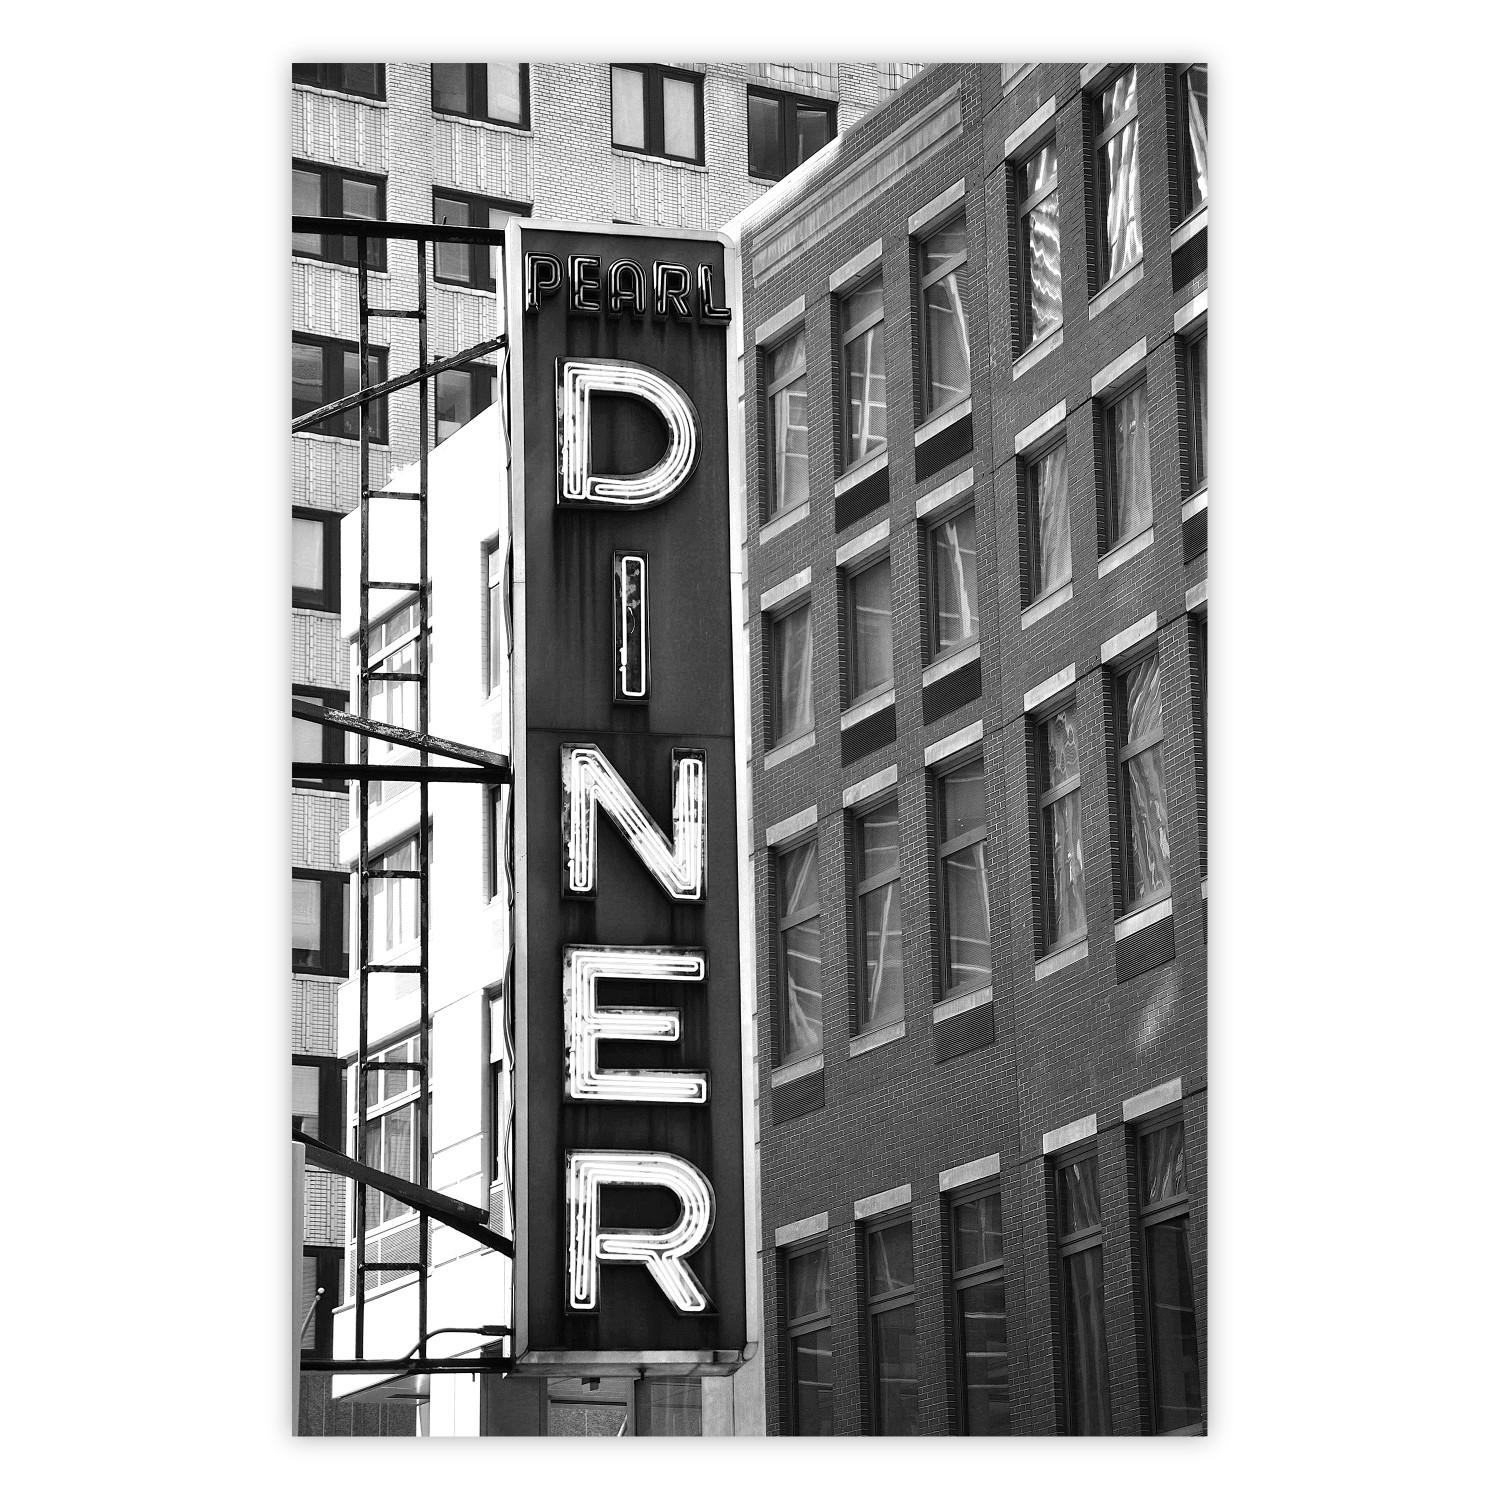 Poster New York Neon - black and white architecture of buildings in New York